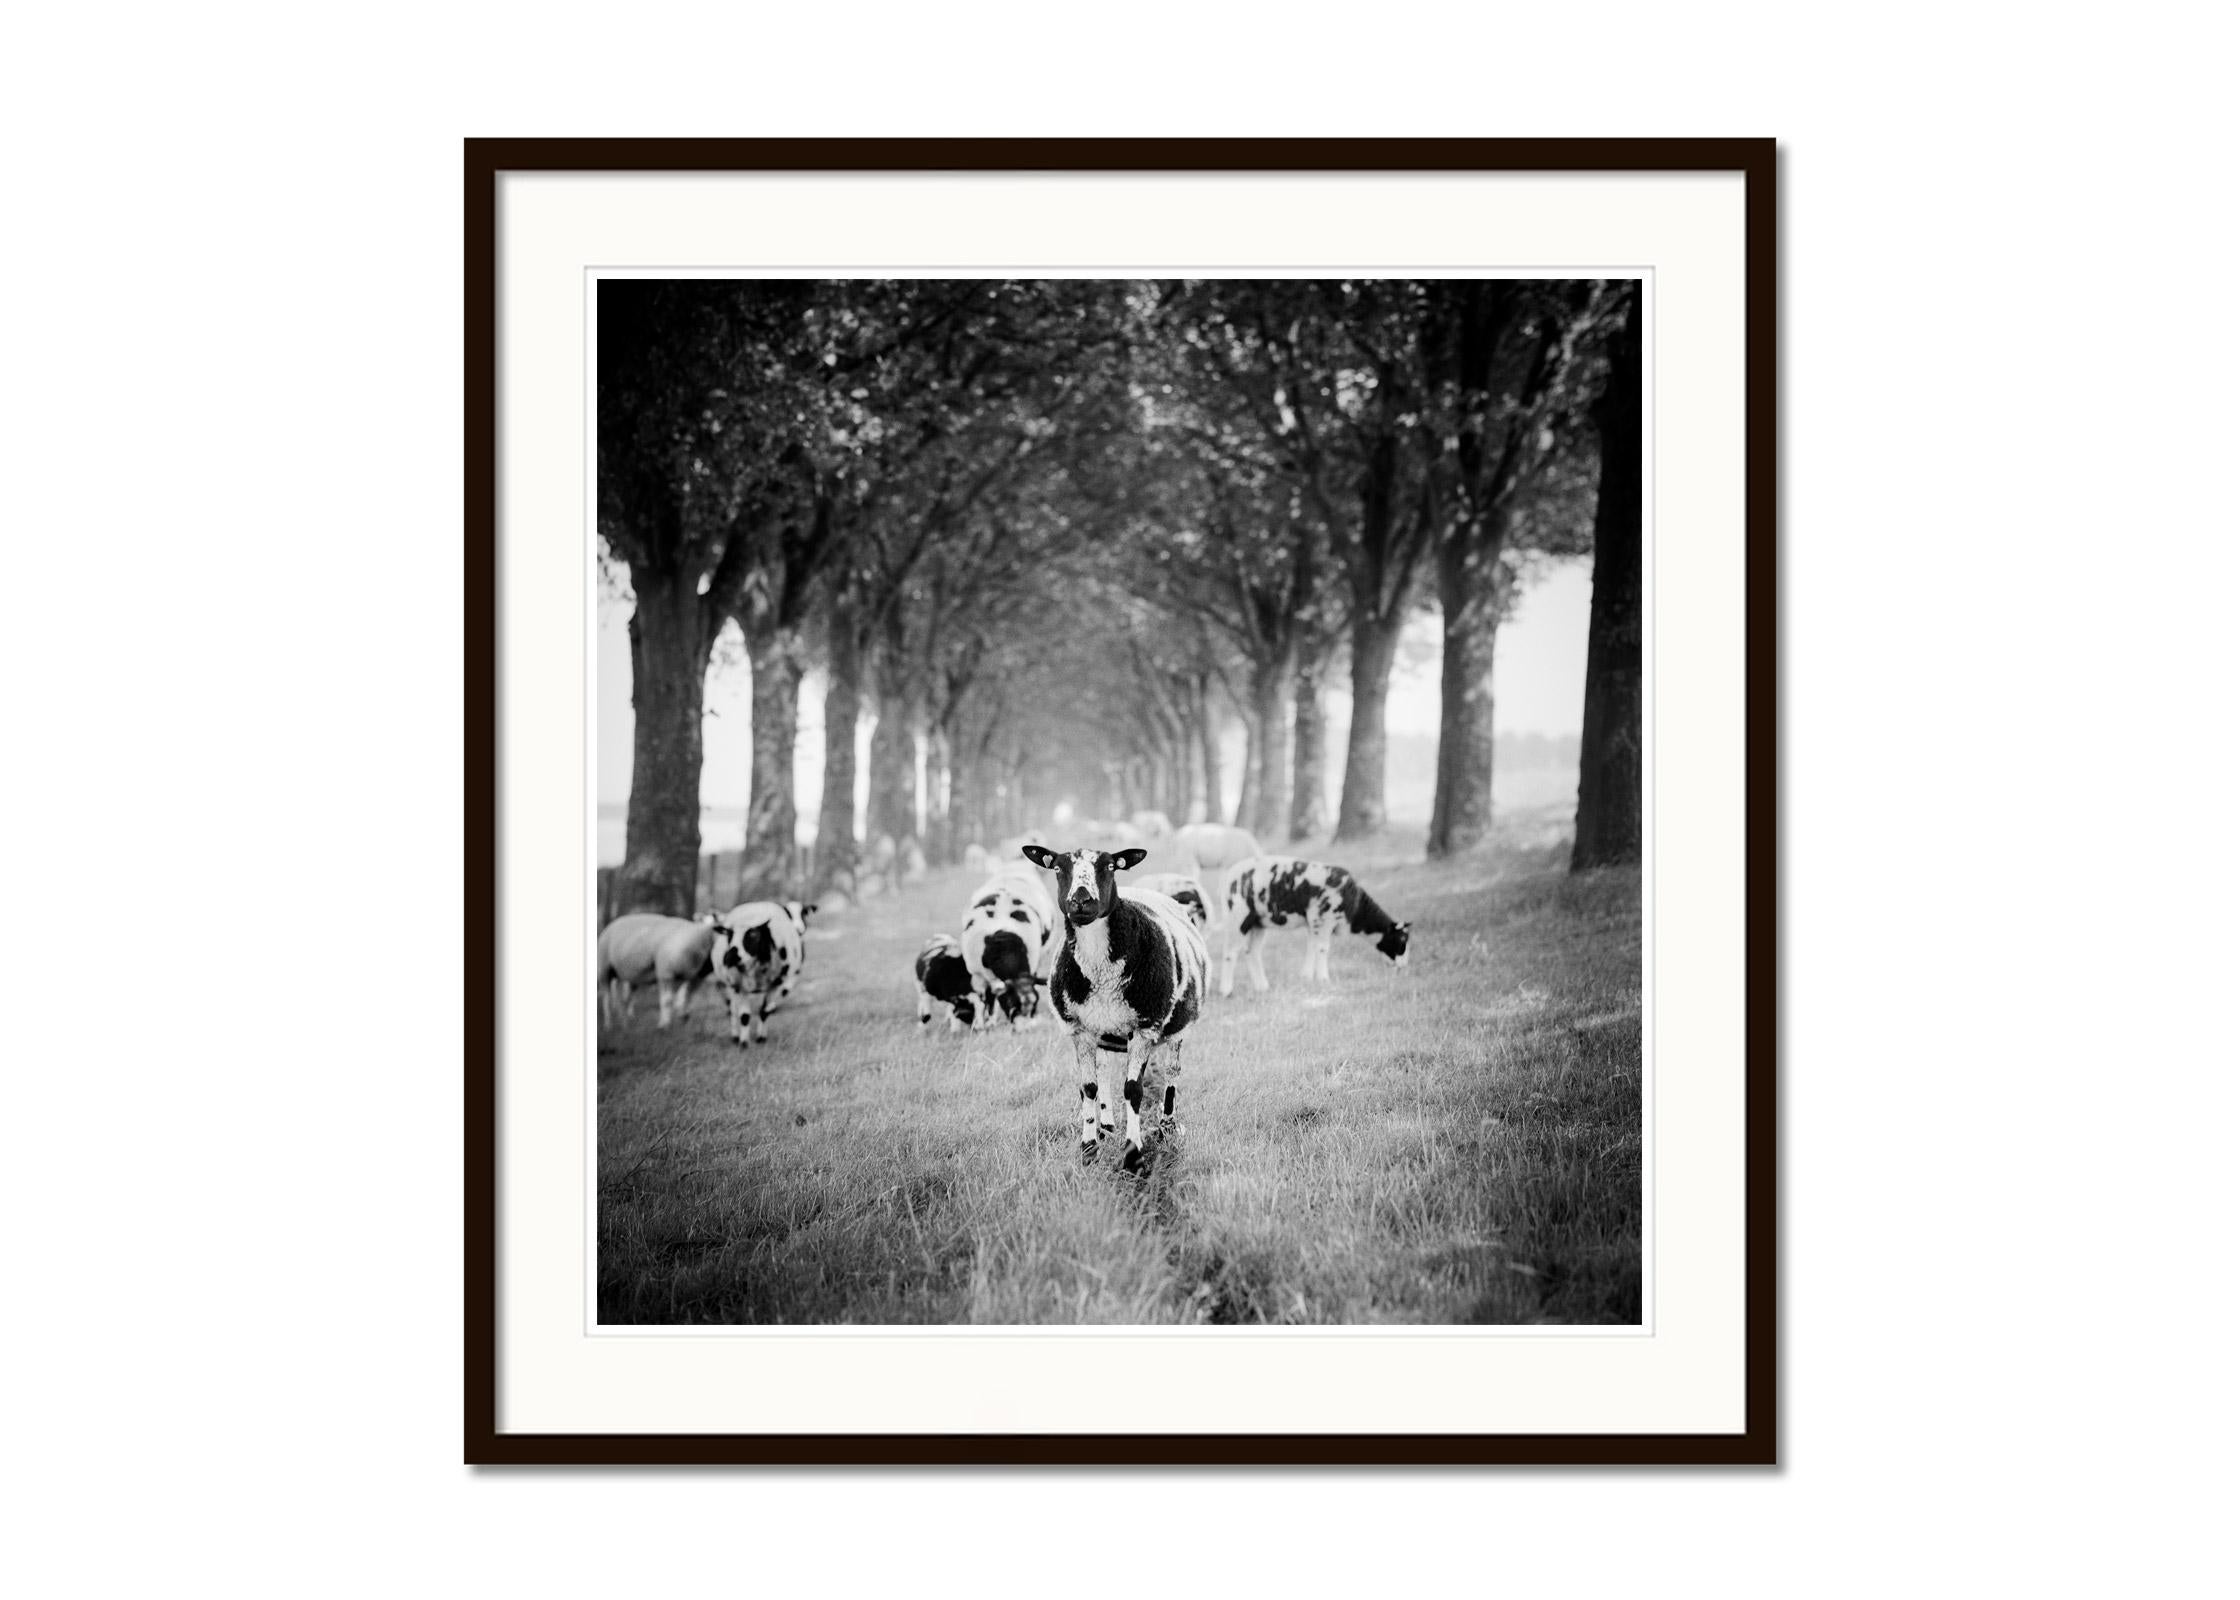 Shaun the Sheep, Tree Avenue, black and white photography, fine art, landscape - Gray Black and White Photograph by Gerald Berghammer